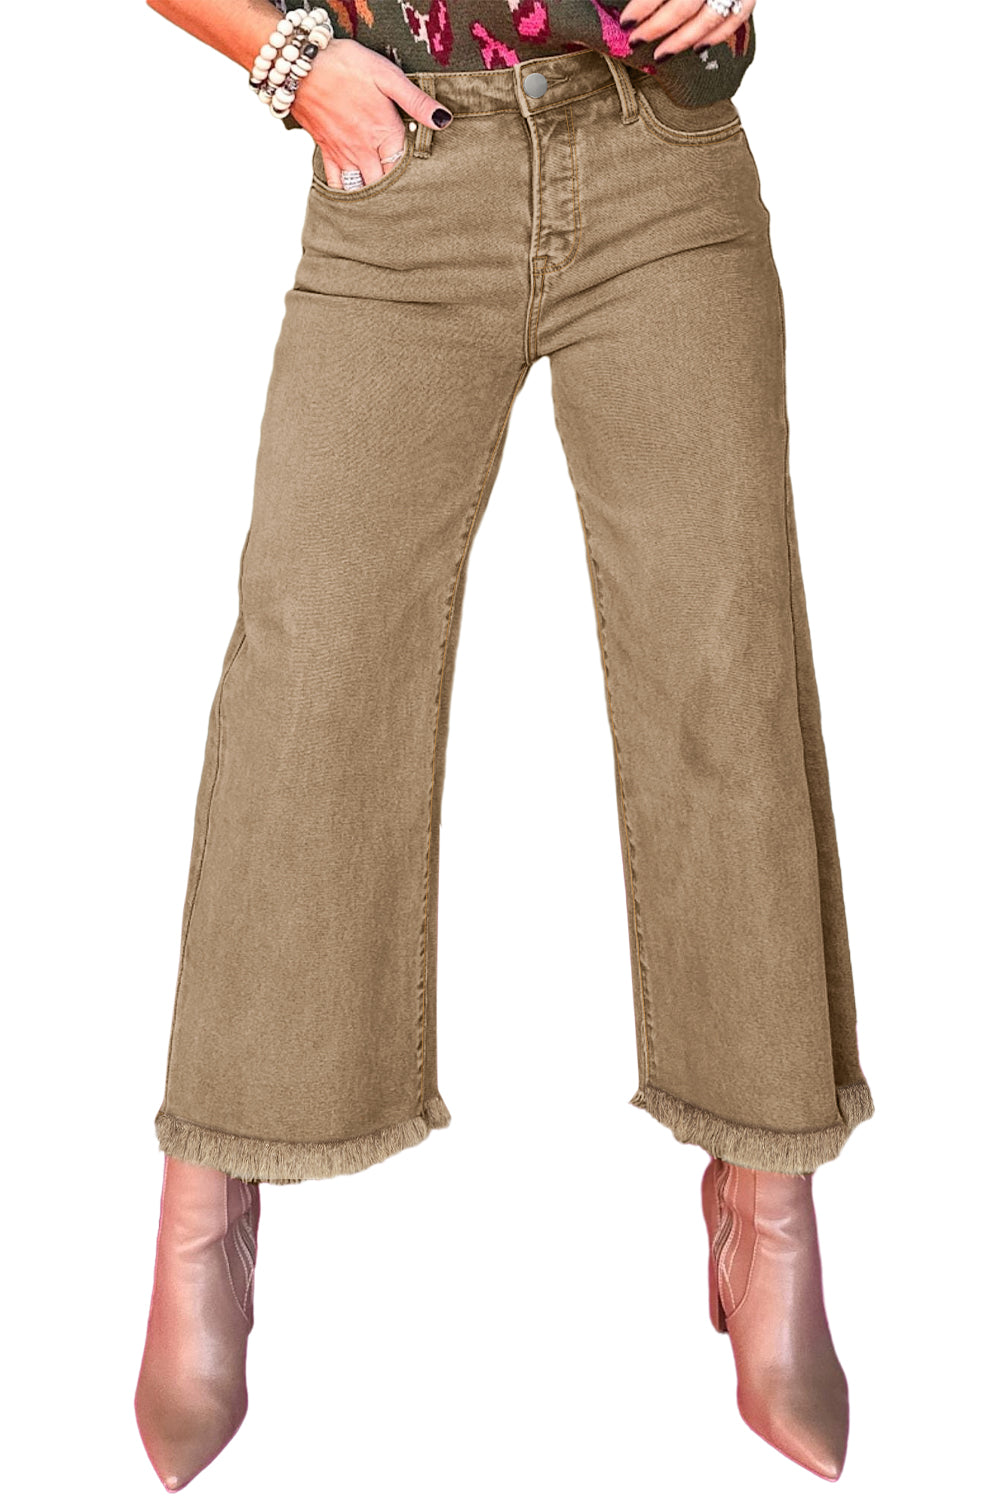 Light French Beige Acid Washed High Rise Cropped Wide Leg Jeans-2